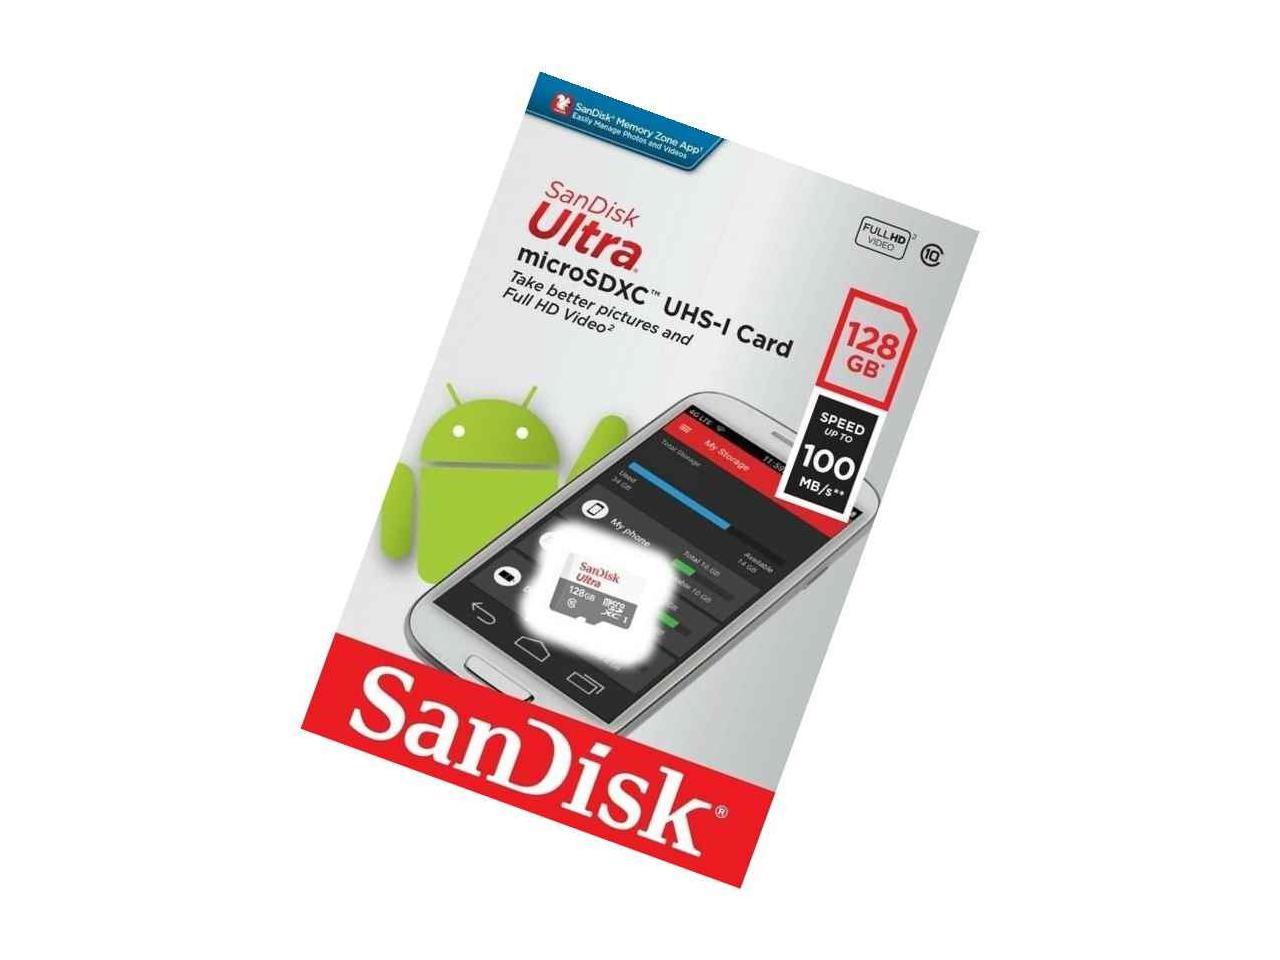 SanDisk Ultra 128GB MicroSDXC Verified for Huawei Ascend G525 by SanFlash 100MBs A1 U1 C10 Works with SanDisk